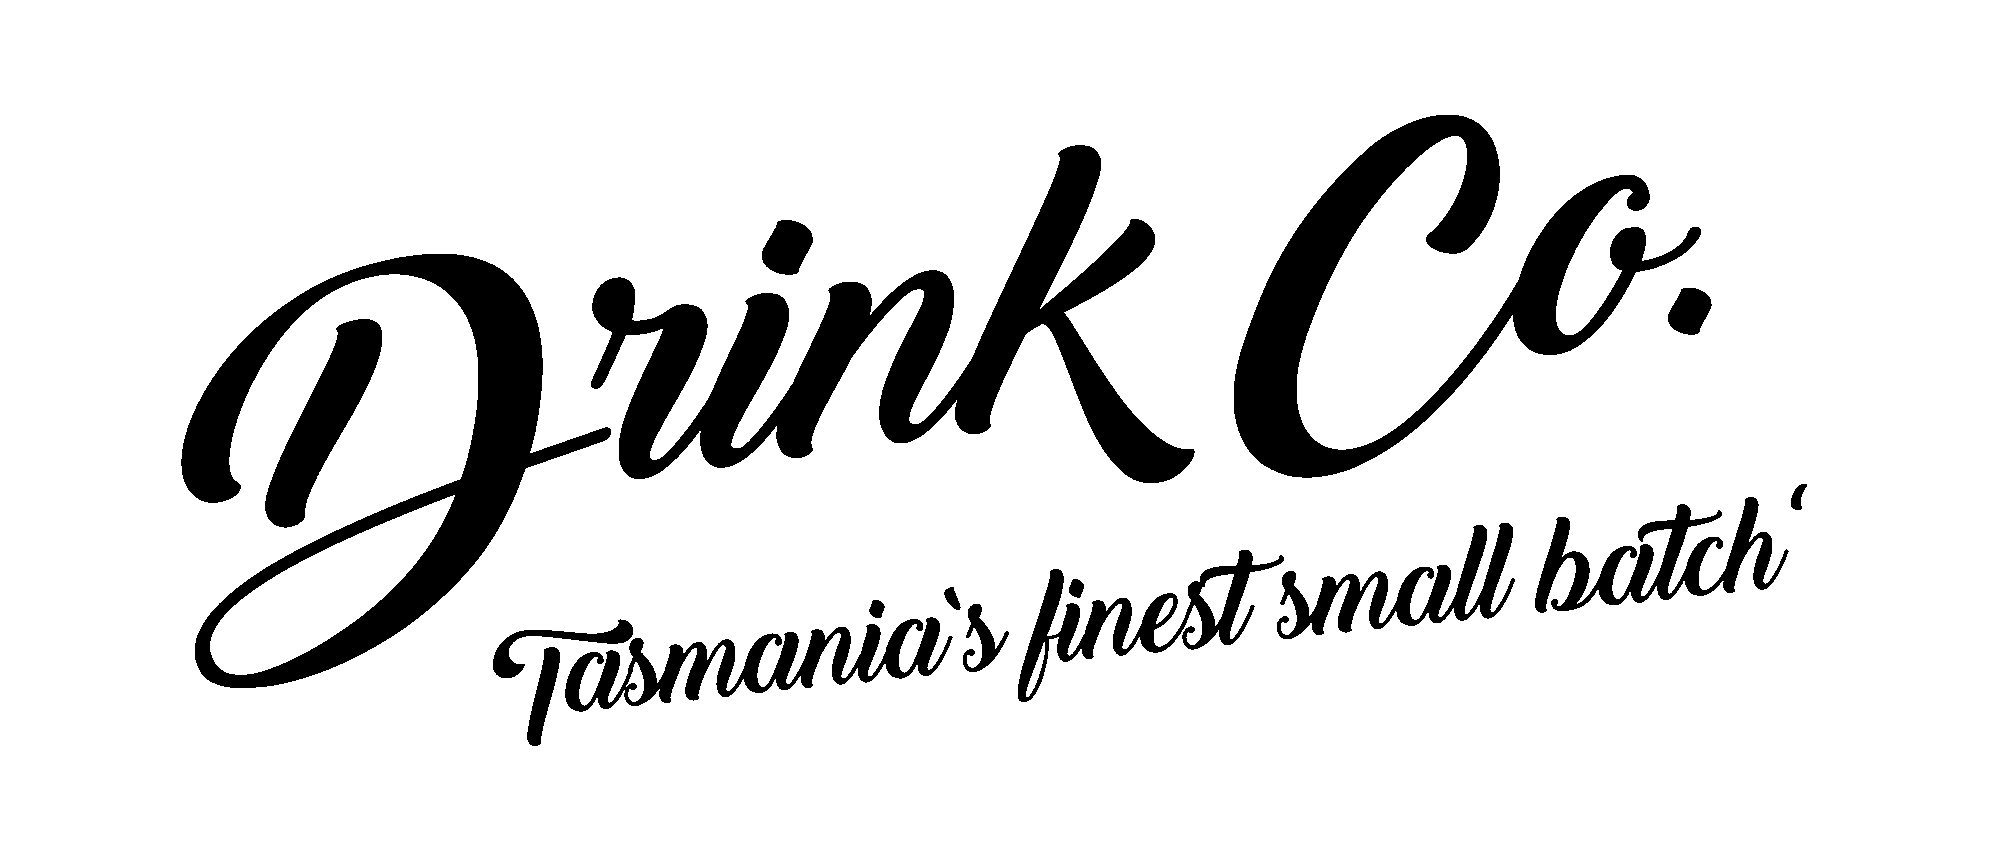 Drink Co